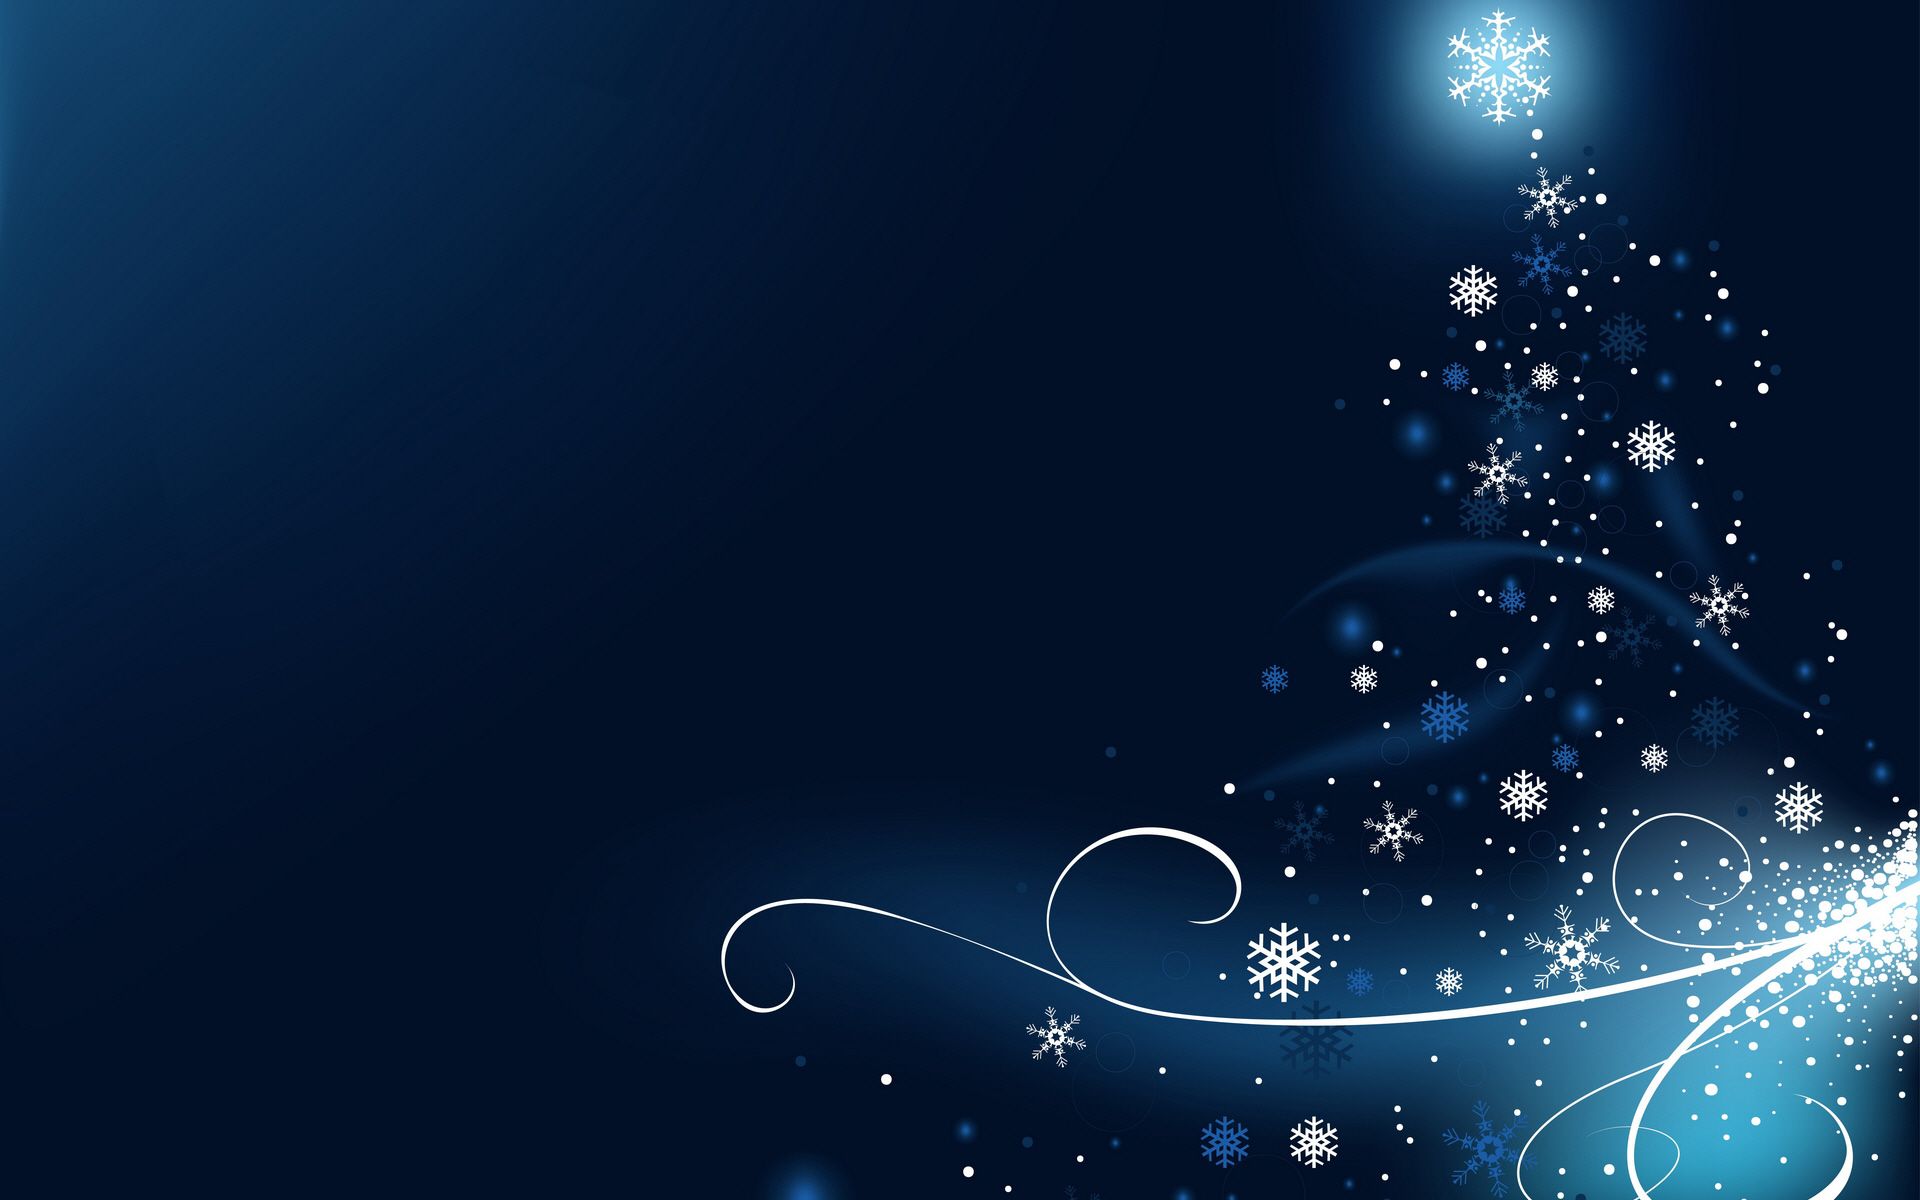 A blue Christmas tree wallpaper with snowflakes - Snowflake